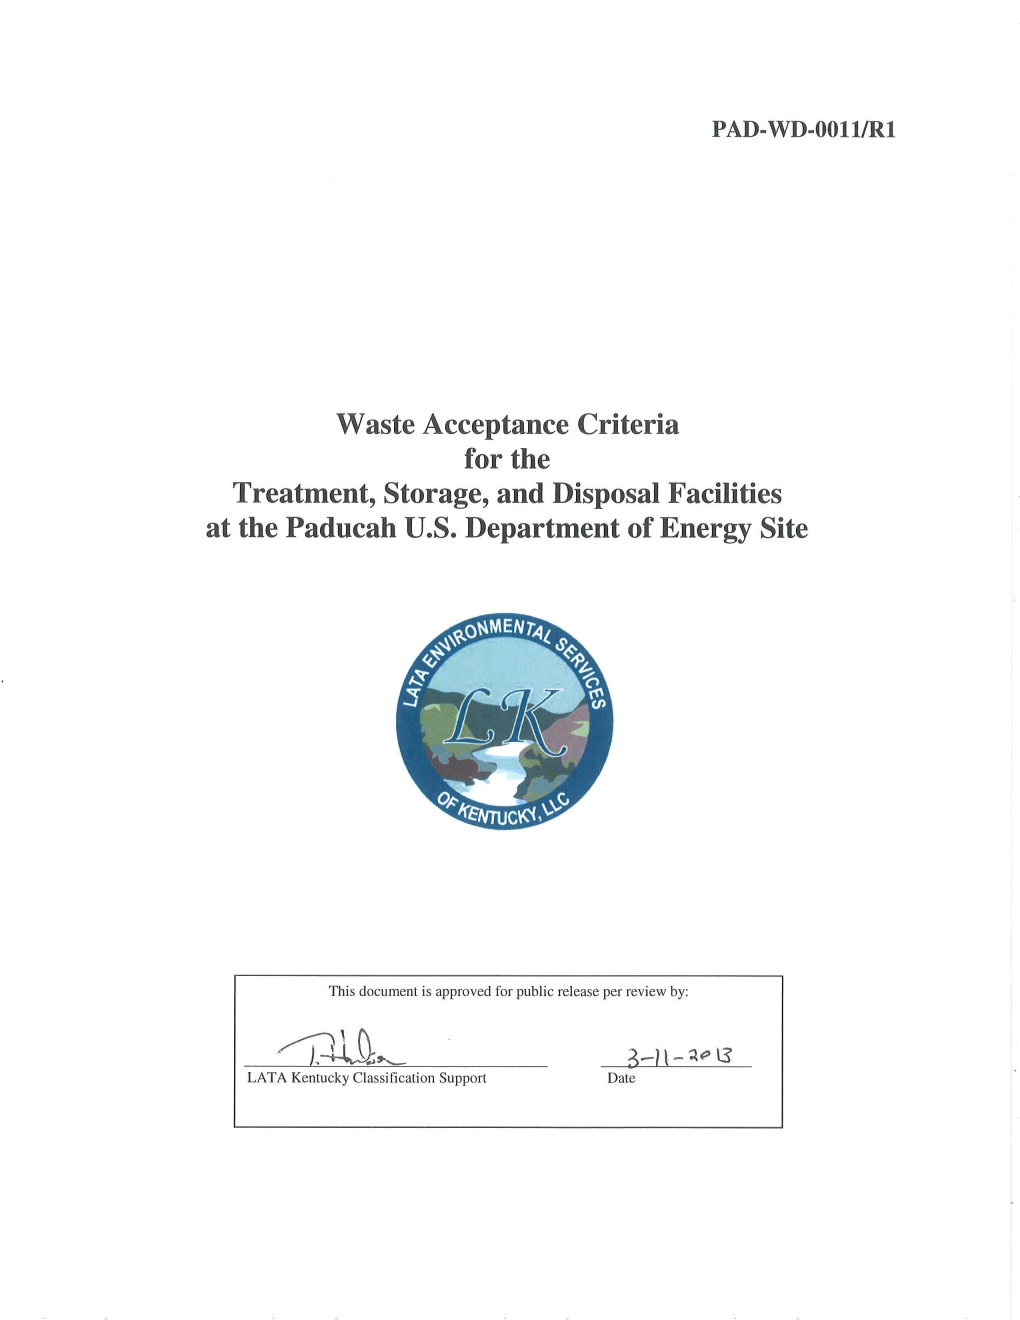 Waste Acceptance Criteria for the Treatment, Storage, and Disposal Facilities at the Paducah U.S